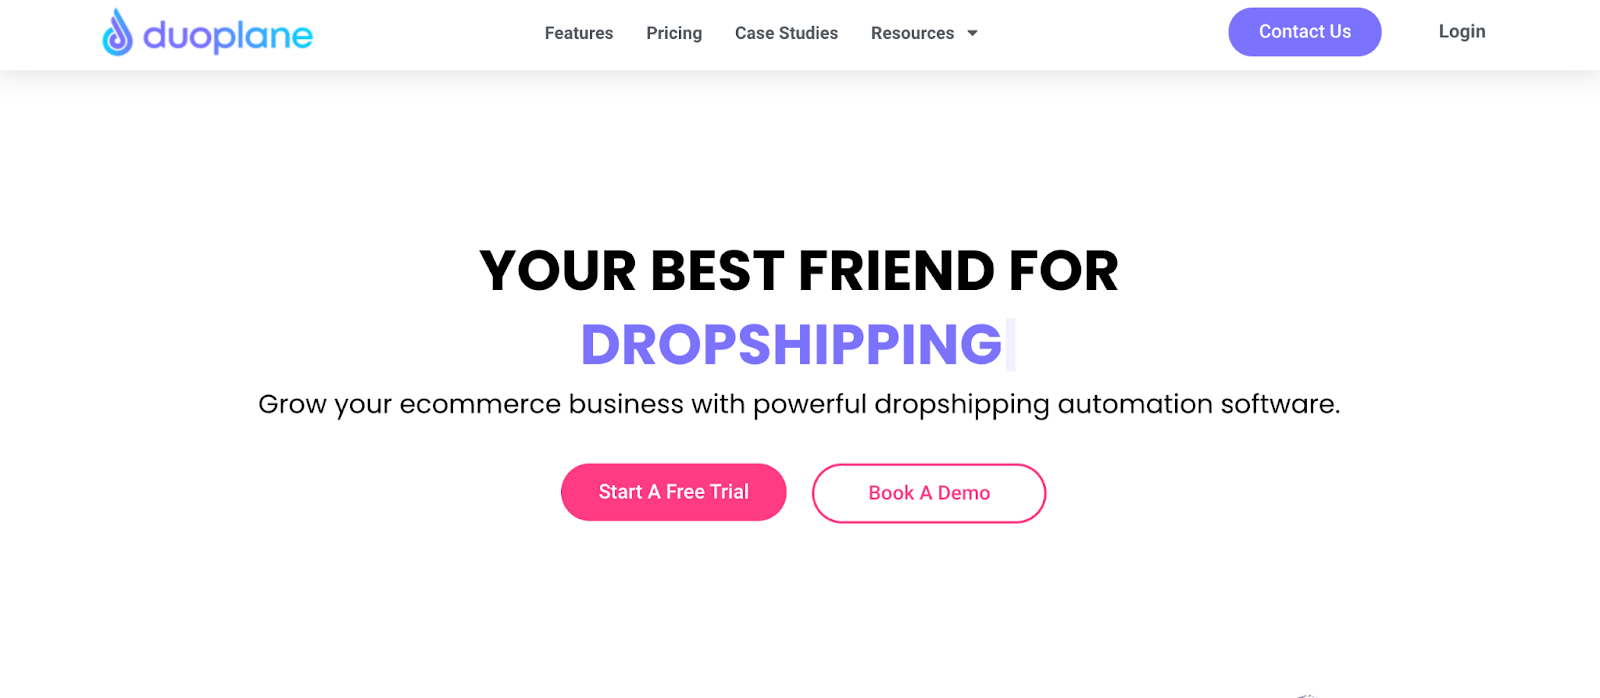 duoplance dropshipping automation